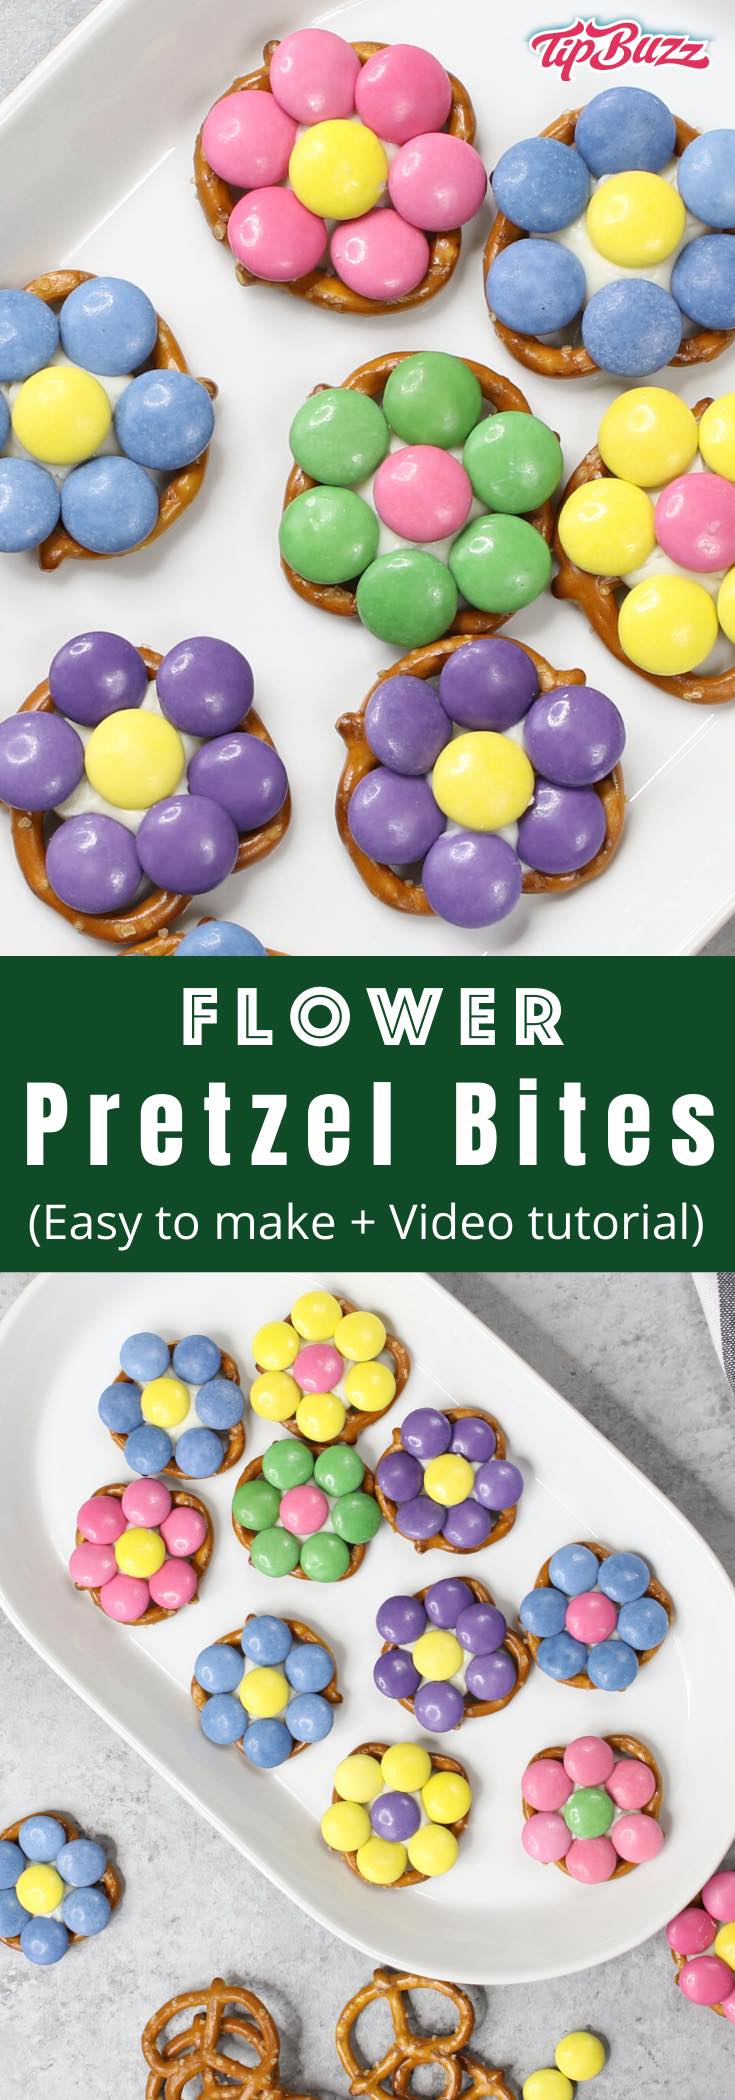 These Easter Pretzel Flower Bites are perfect treats and DIY gifts to celebrate the arrival of spring! All you need are some pretzels, candy melts and pastel M&Ms. These easy treats are ready in just 10 minutes! #flowerPretzelBites